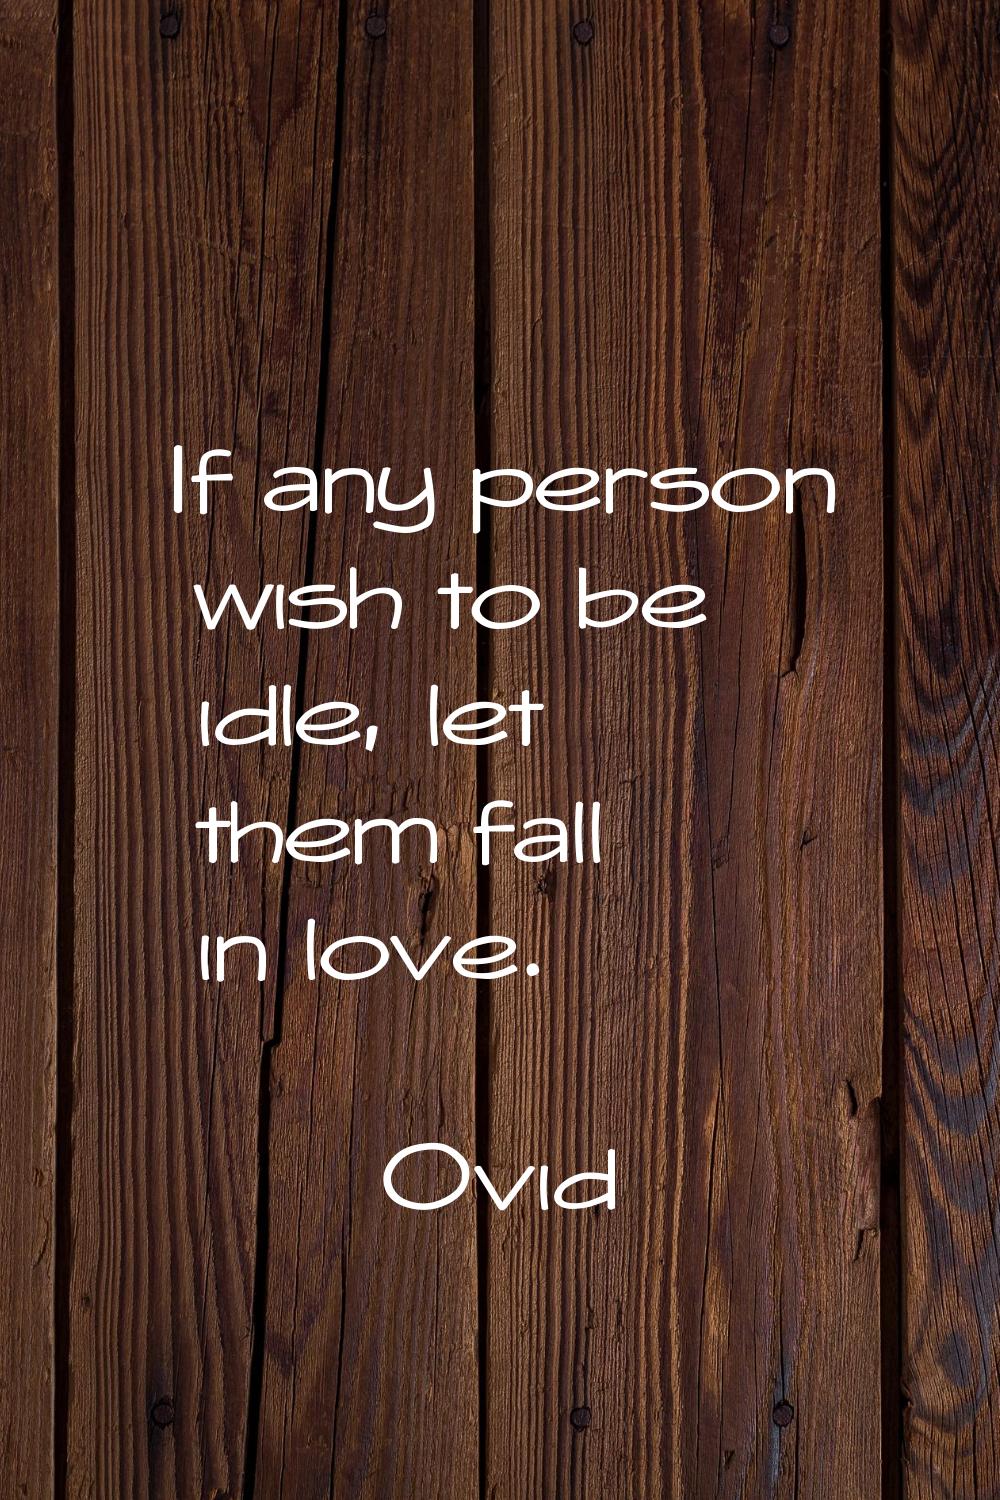 If any person wish to be idle, let them fall in love.